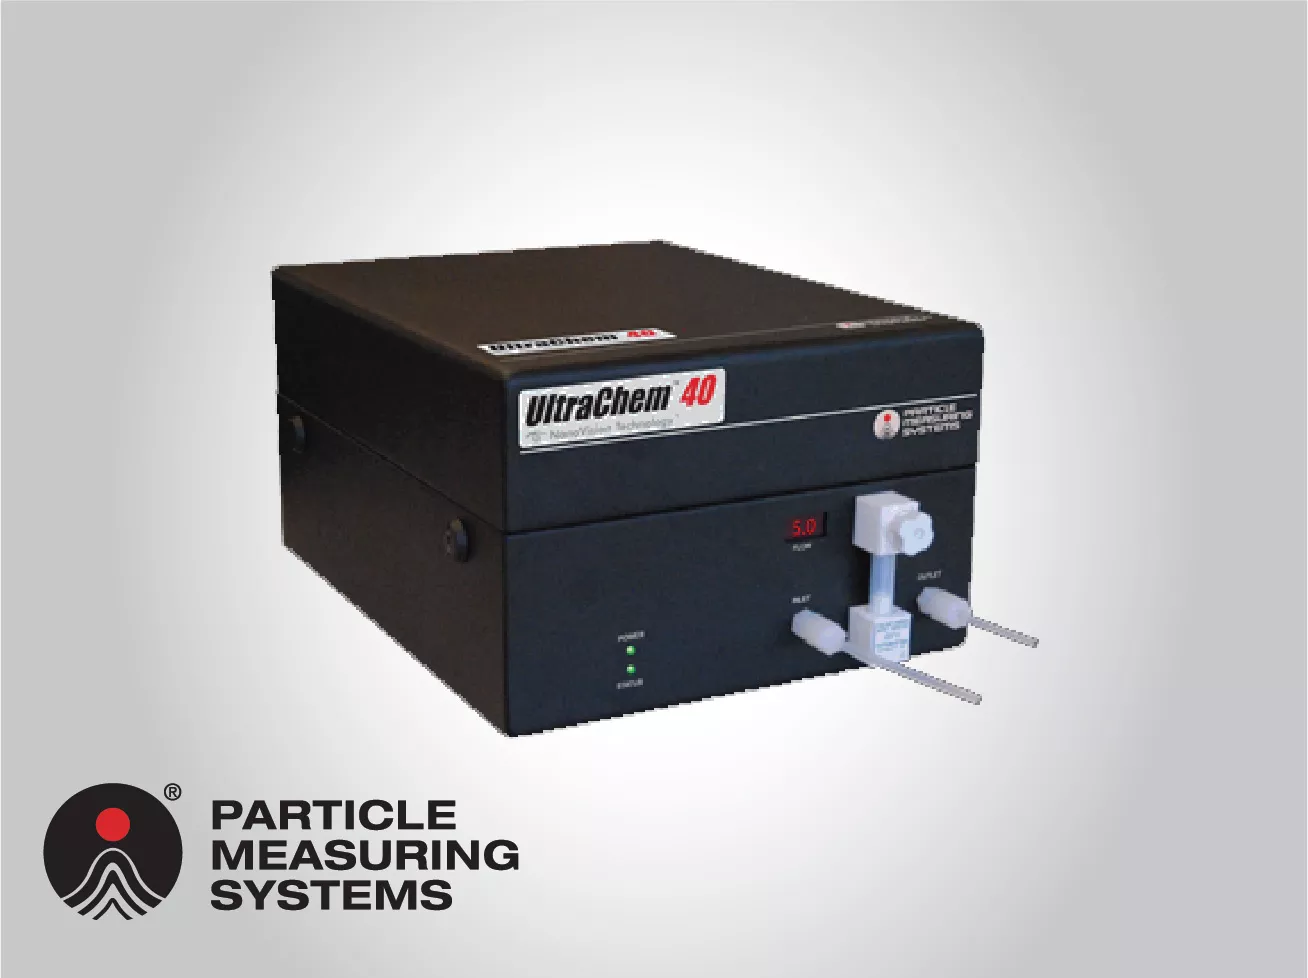 PMS Liquid Particle Counters